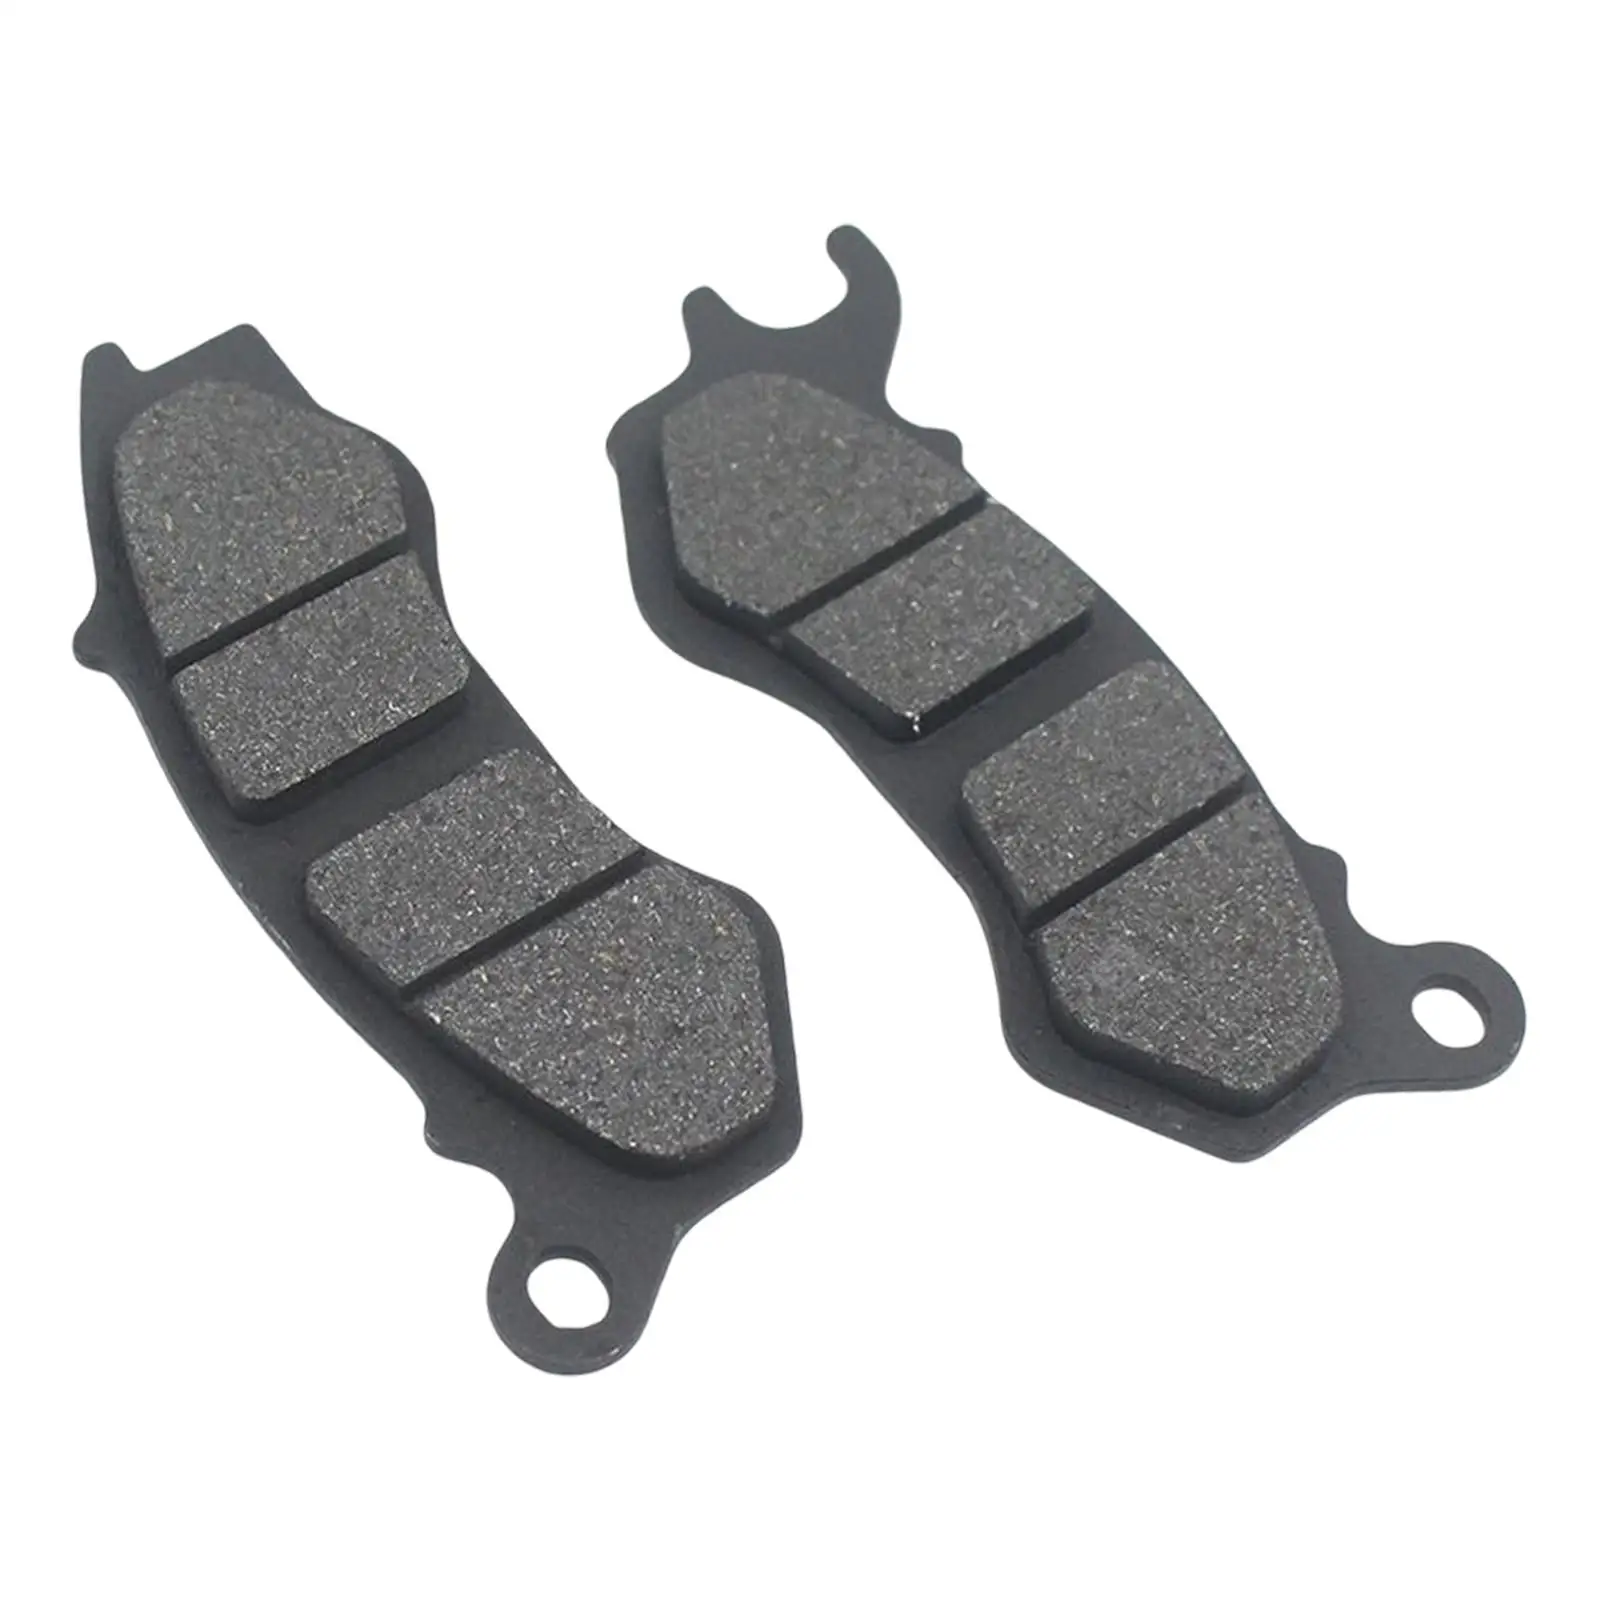 Front Brake Pads for Honda PCX 125 150 - High-Quality Wood Material, Eas... - $20.61